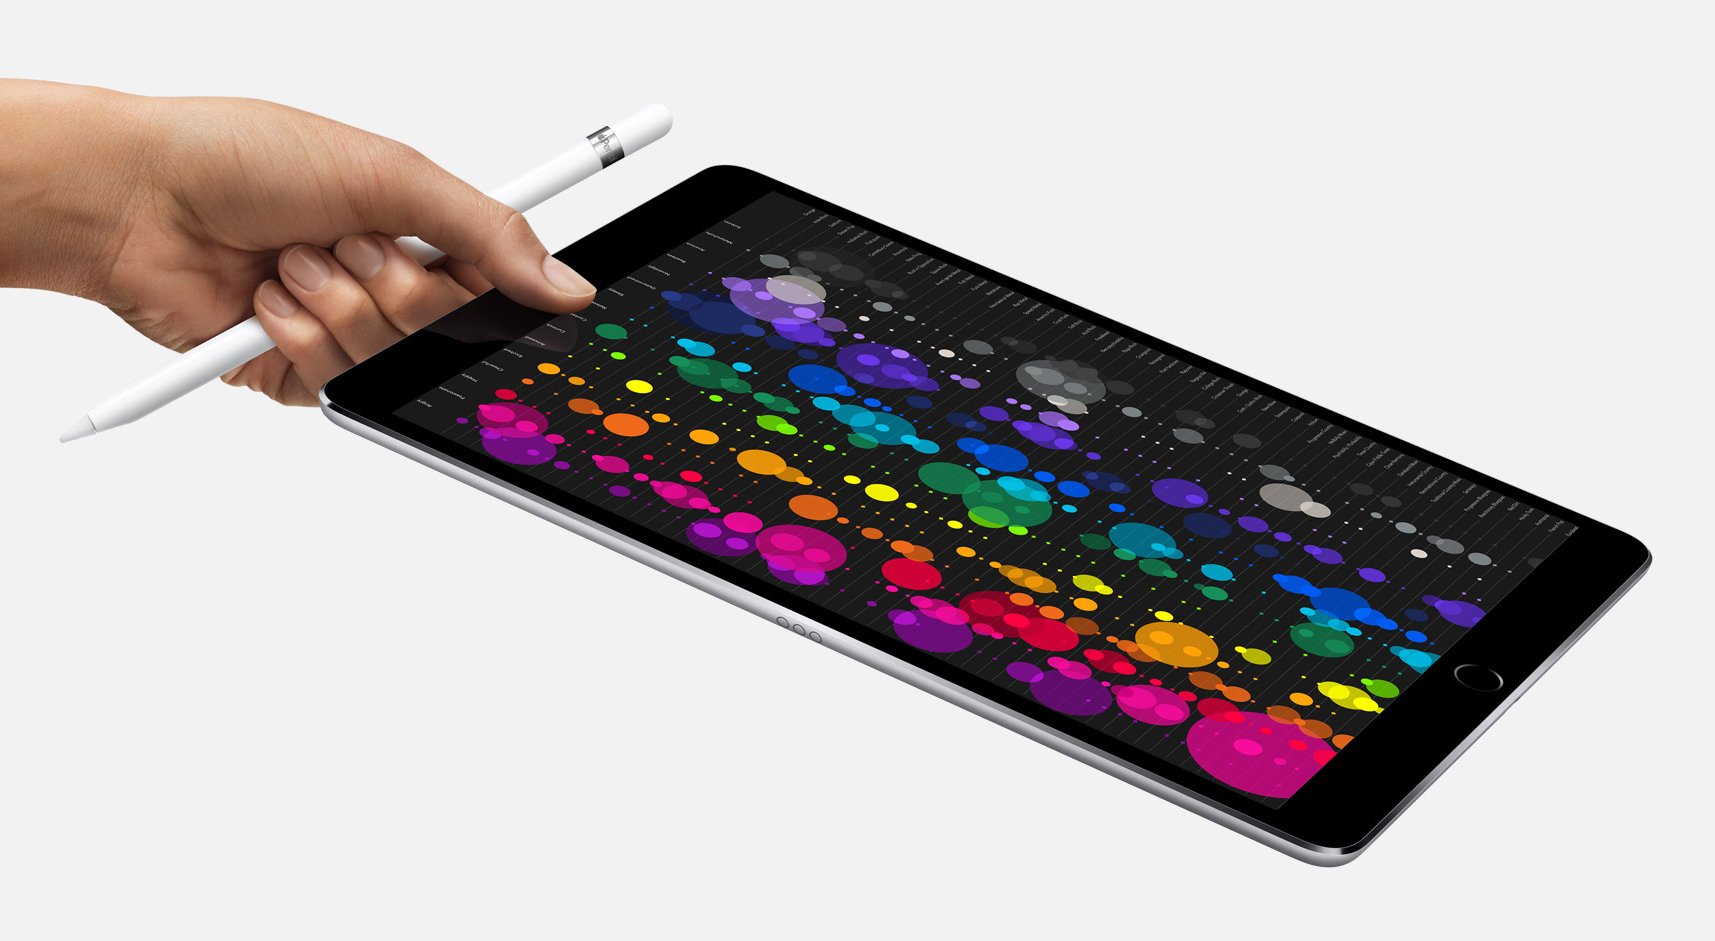 iPad Pro 2021 now available for purchase in Malaysia, stocks available as  early as next week - SoyaCincau